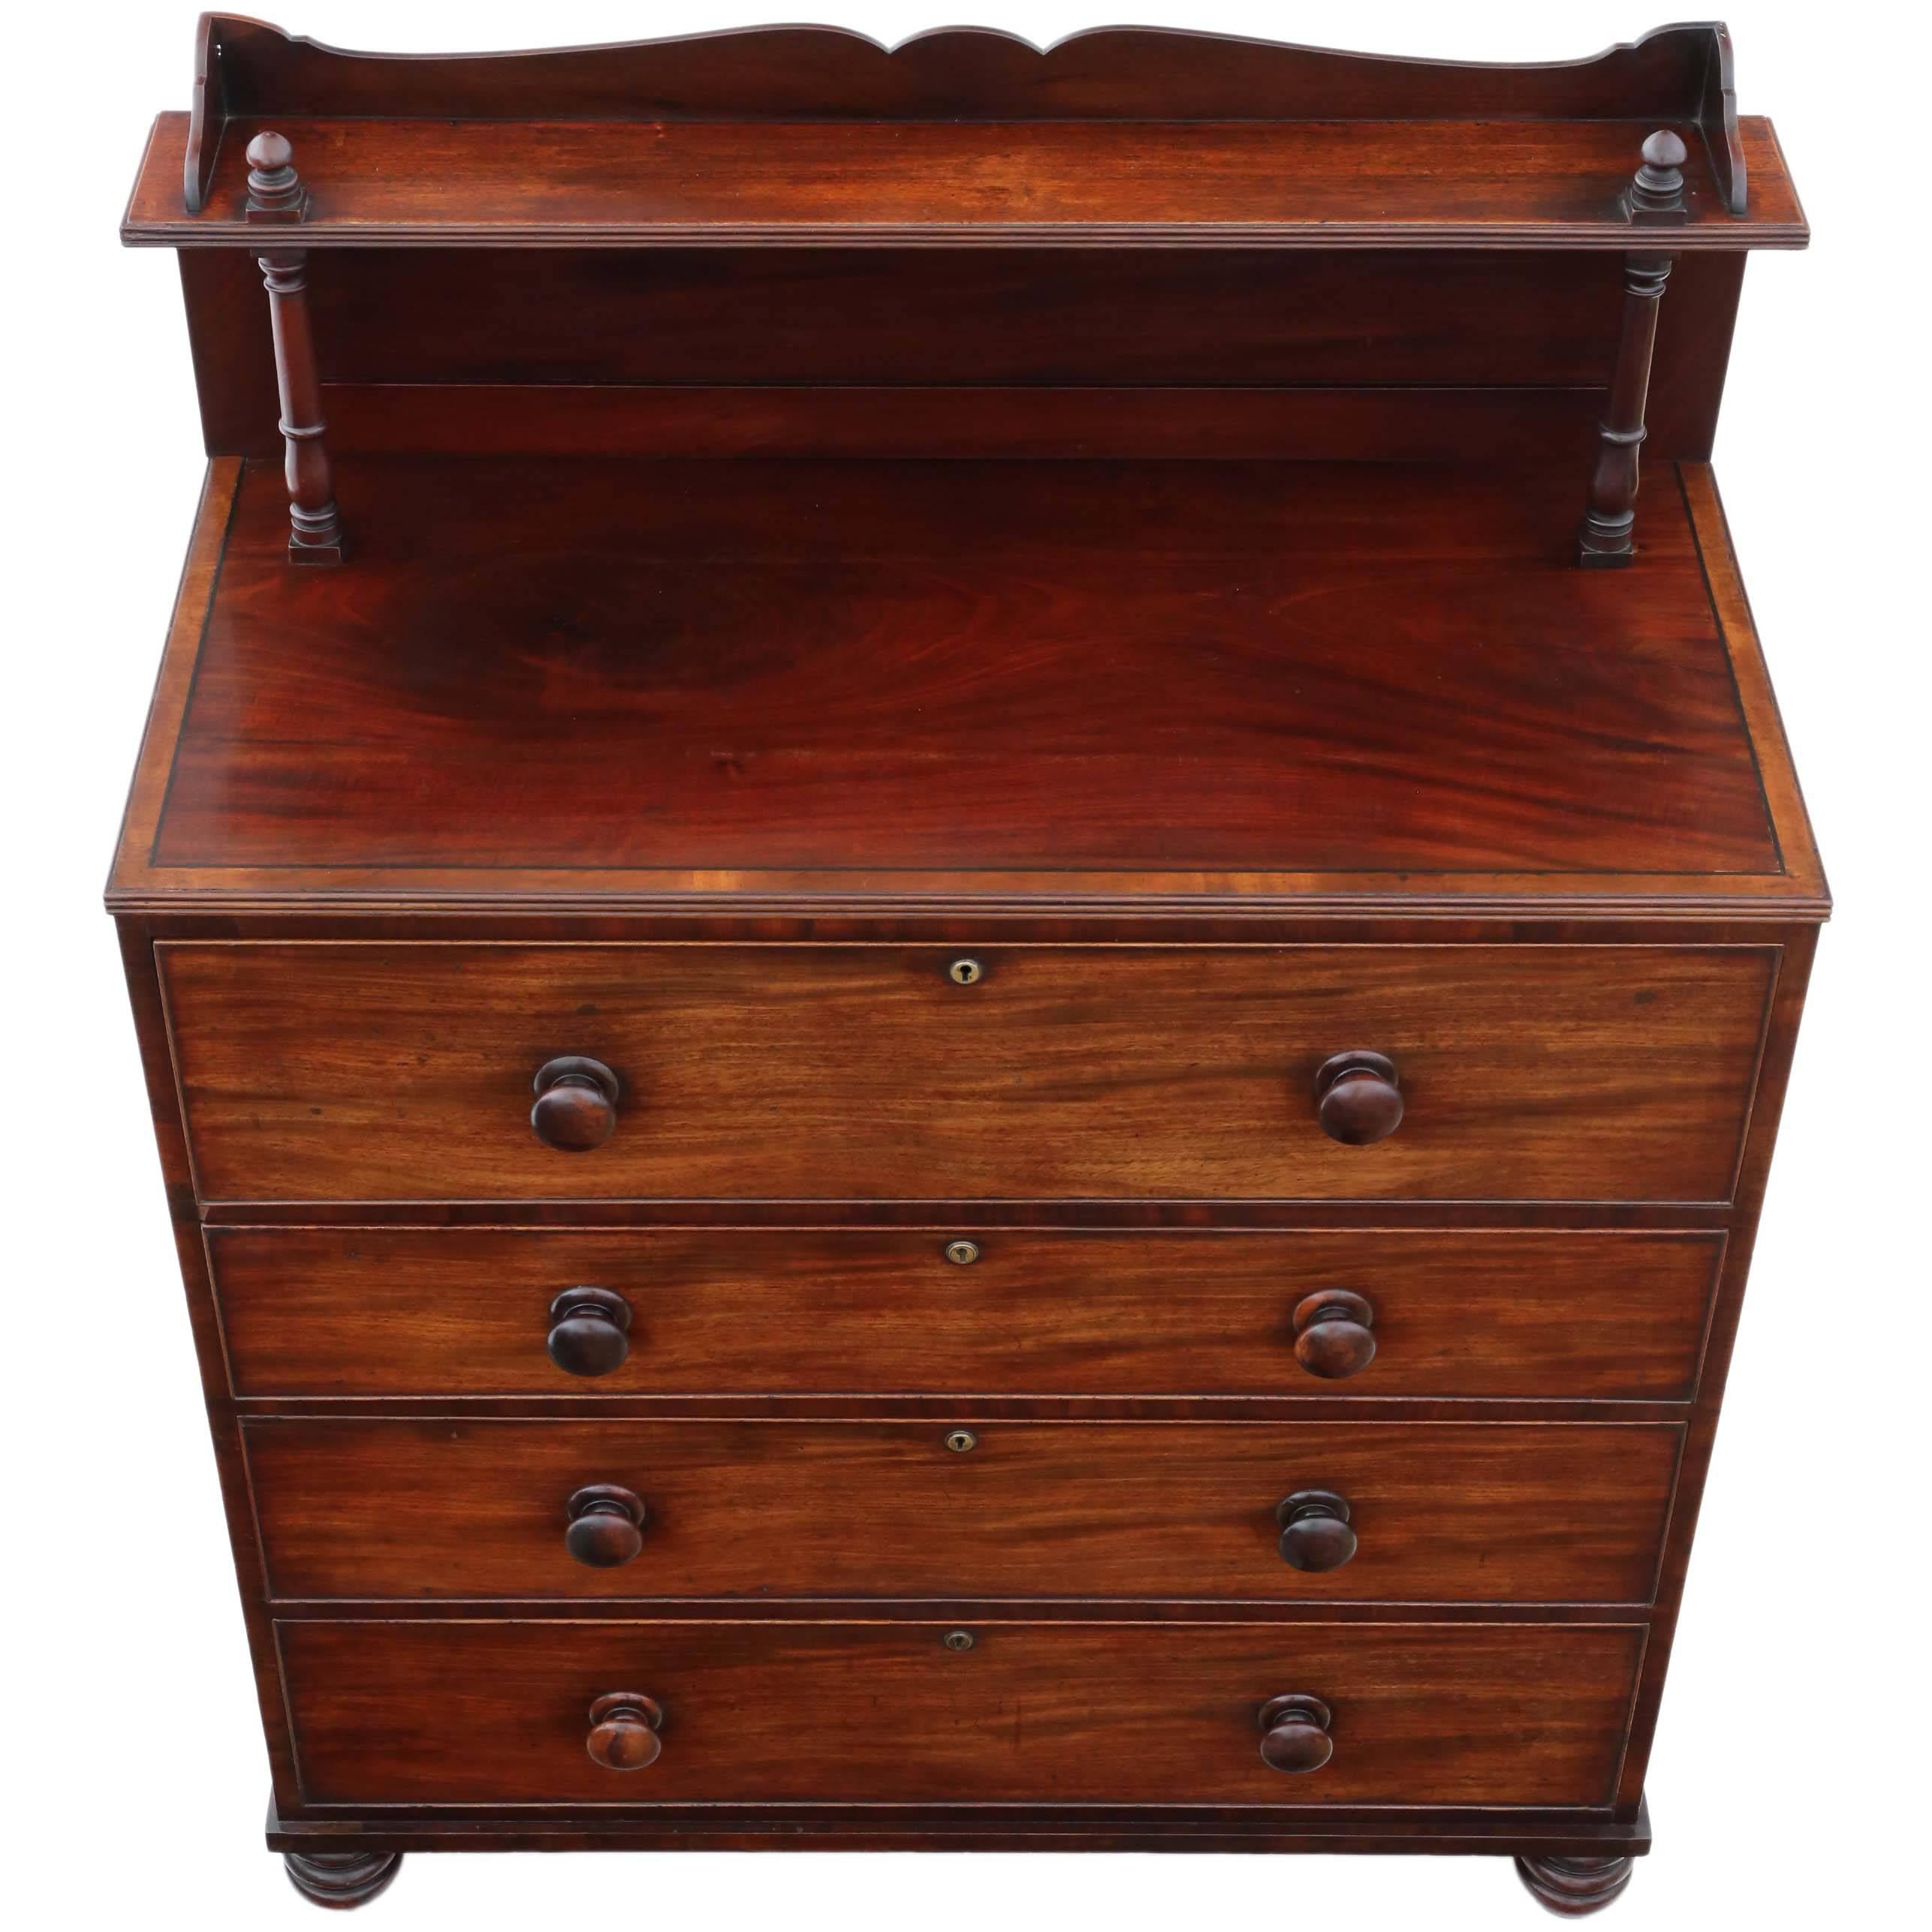 Antique Regency William IV Mahogany Secretaire Desk Writing Chest of Drawers For Sale